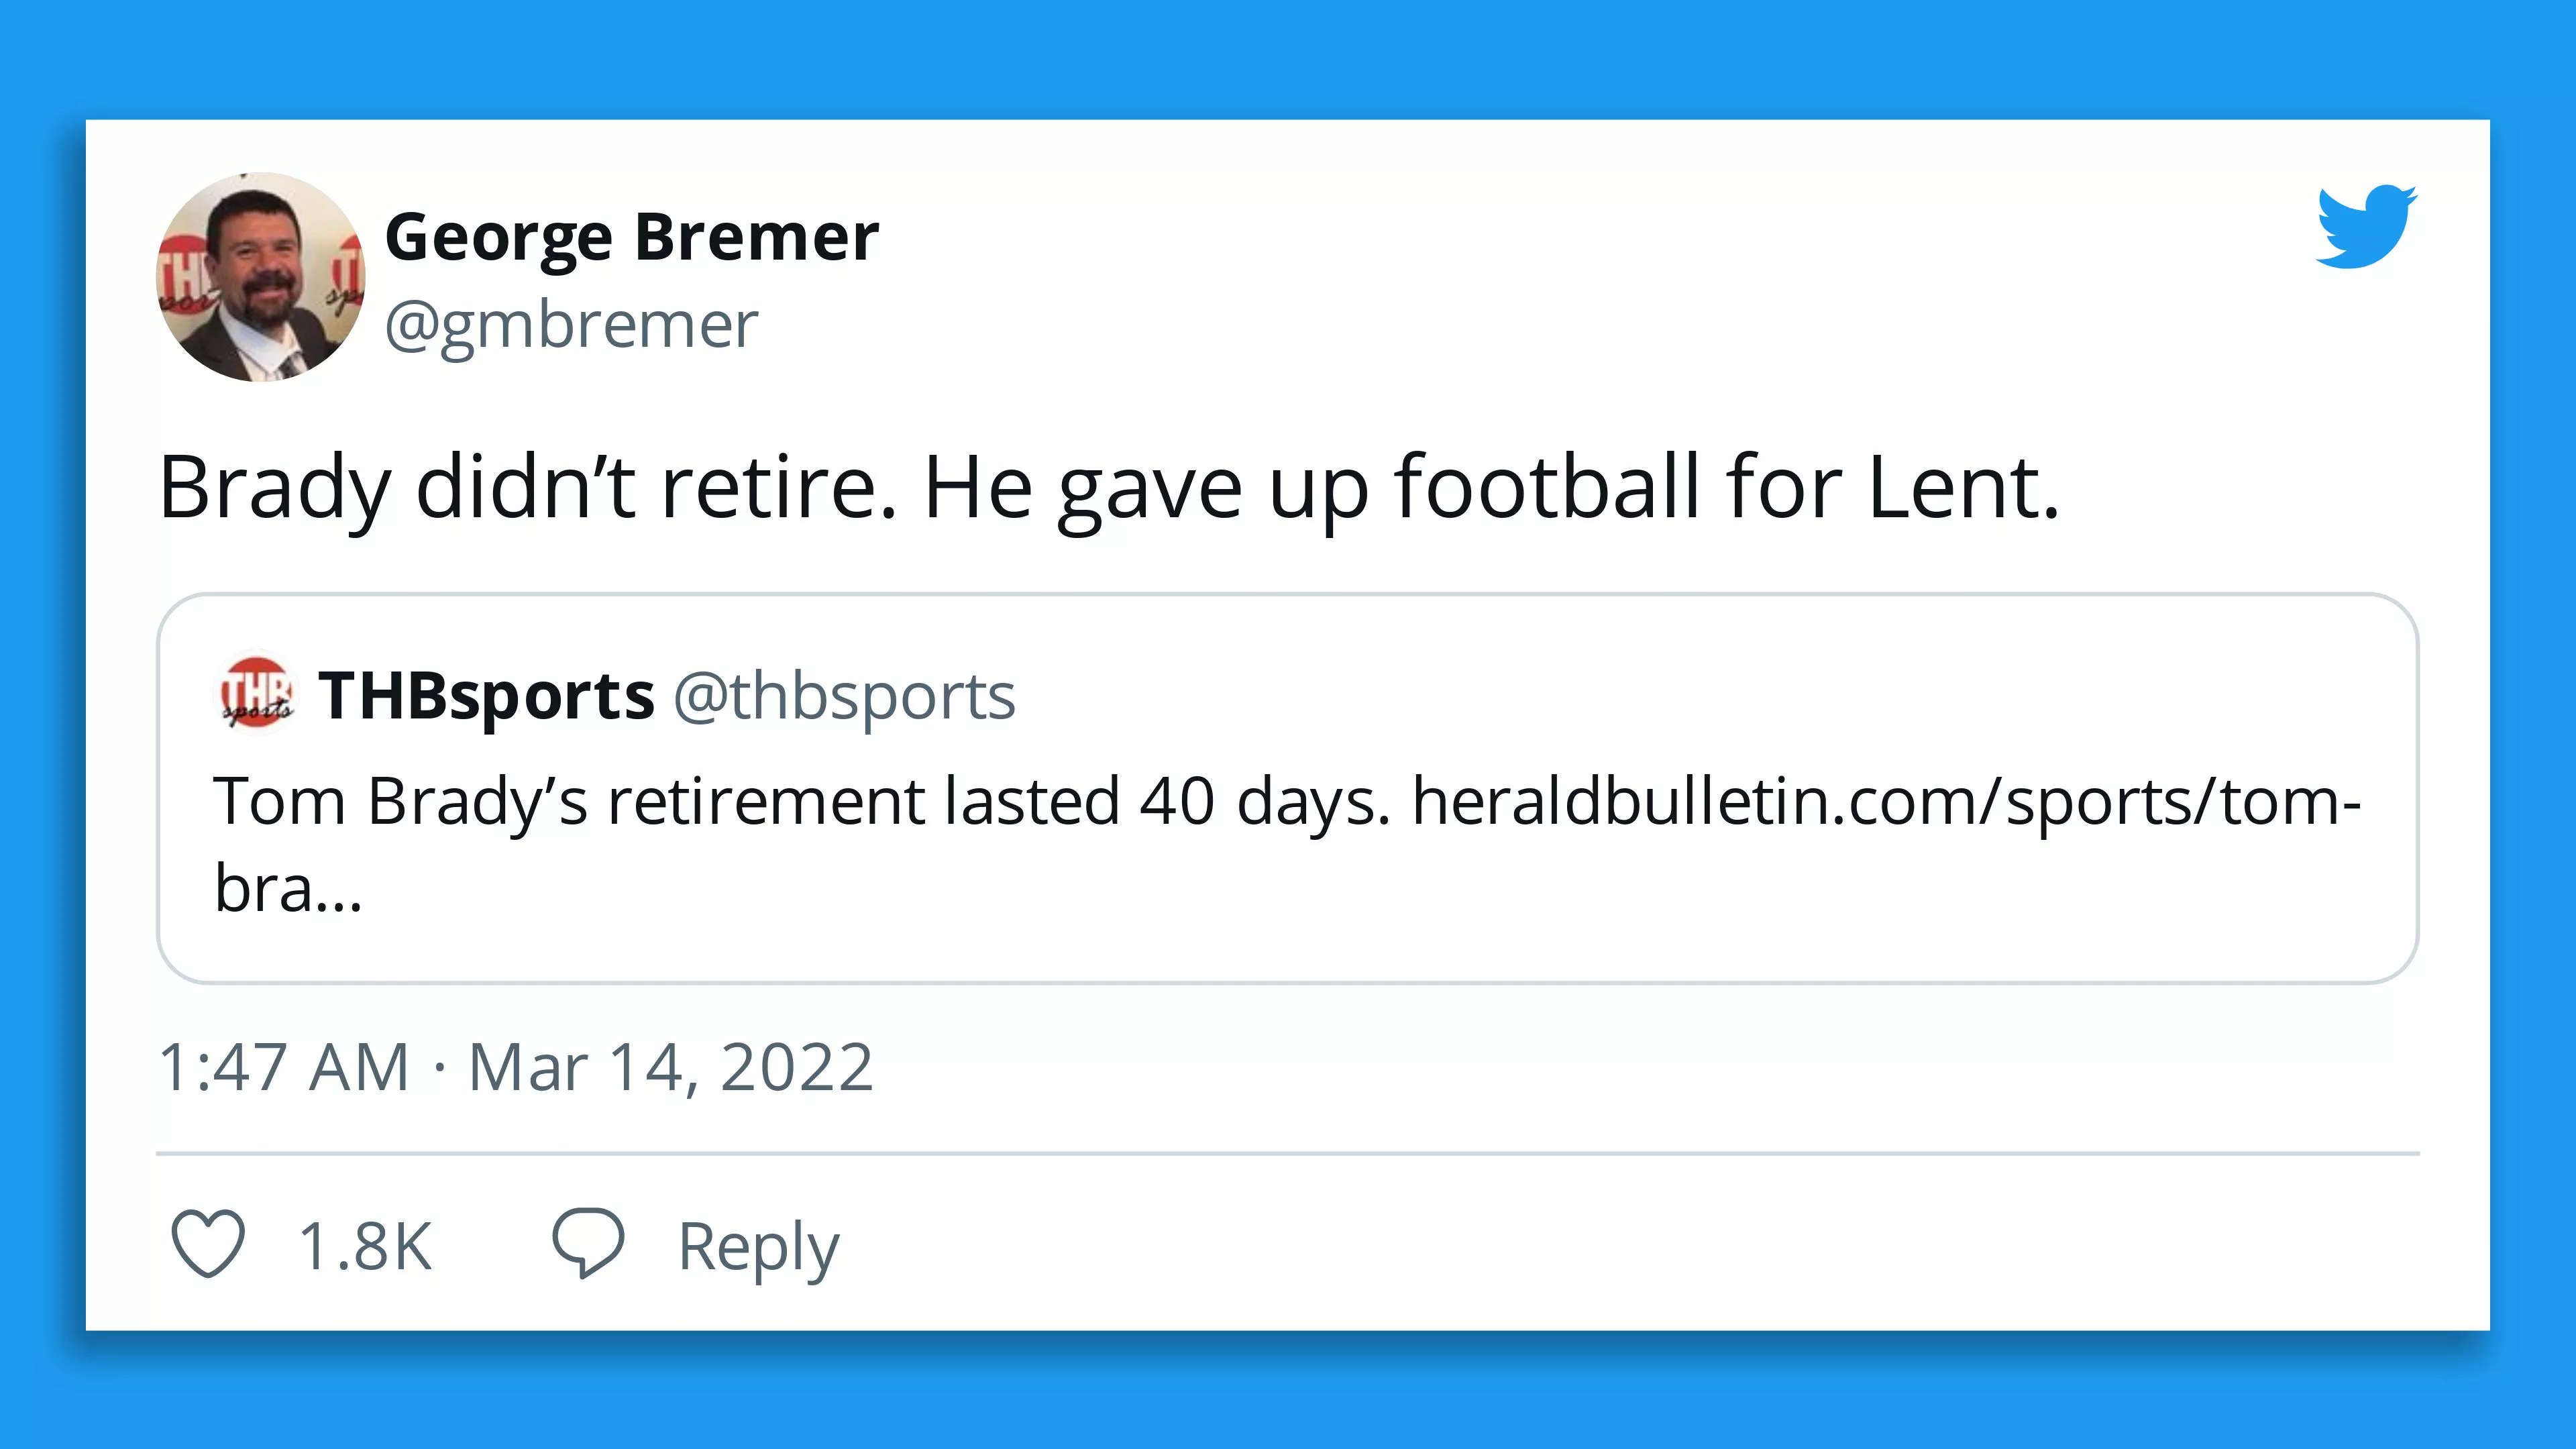 A screenshot of a tweet that says "Brady didn't retire. He gave up football for Lent."